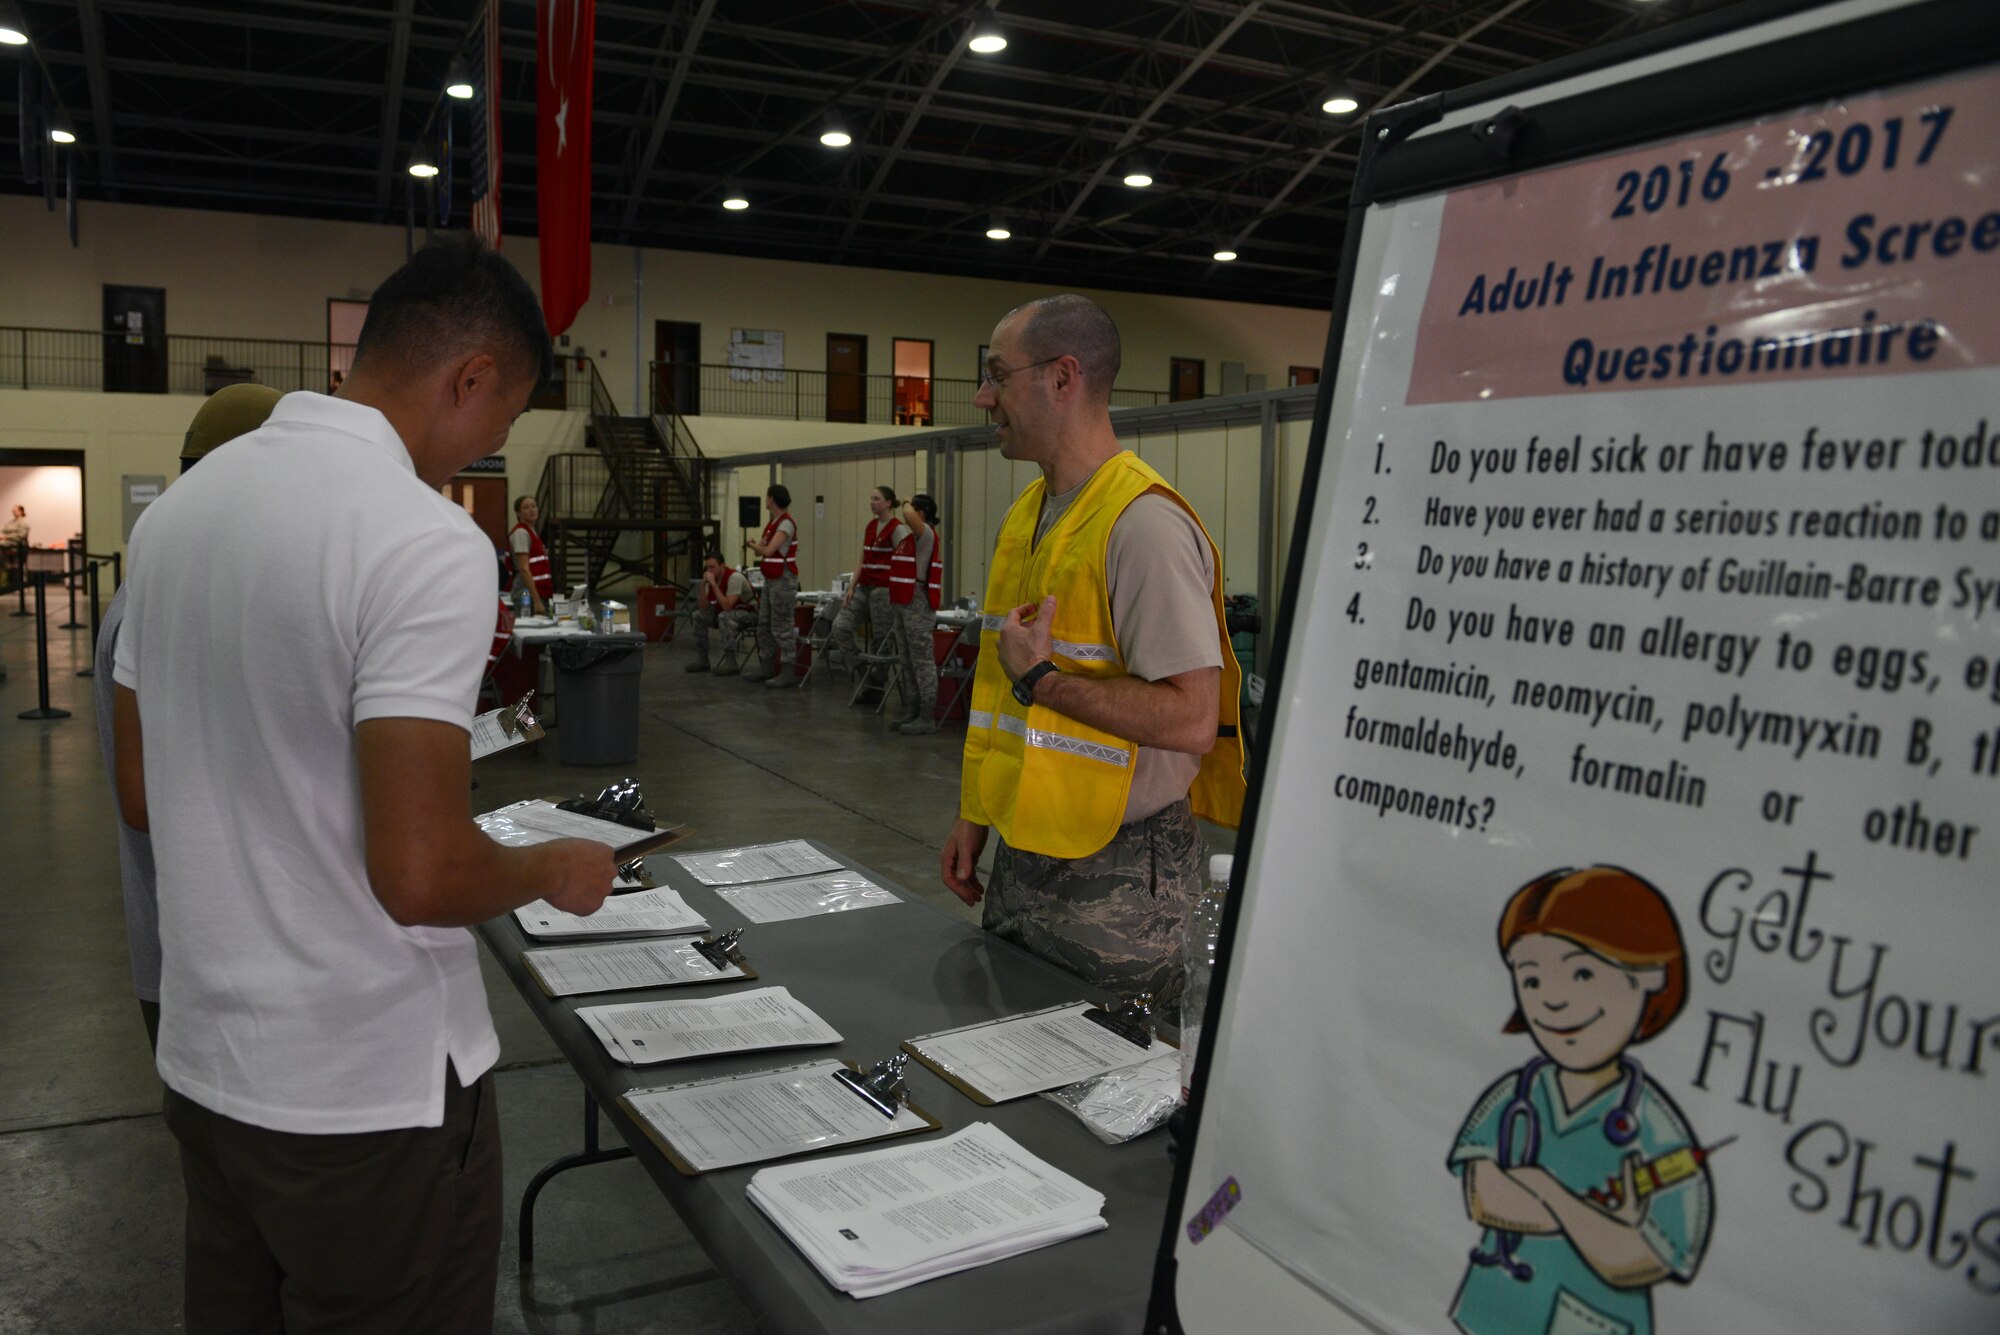 U.S. Air Force Tech. Sgt. James Dossett, 39th Medical Operations Squadron family health technician, greets Airmen and civilians as they come to get influenza vaccinations Oct. 15, 2016, at Incirlik Air Base, Turkey. All military personnel and civilians are required to get the annual influenza vaccination to prevent the virus from spreading during the upcoming flu season. (U.S. Air Force photo by Senior Airman Jasmonet Jackson)